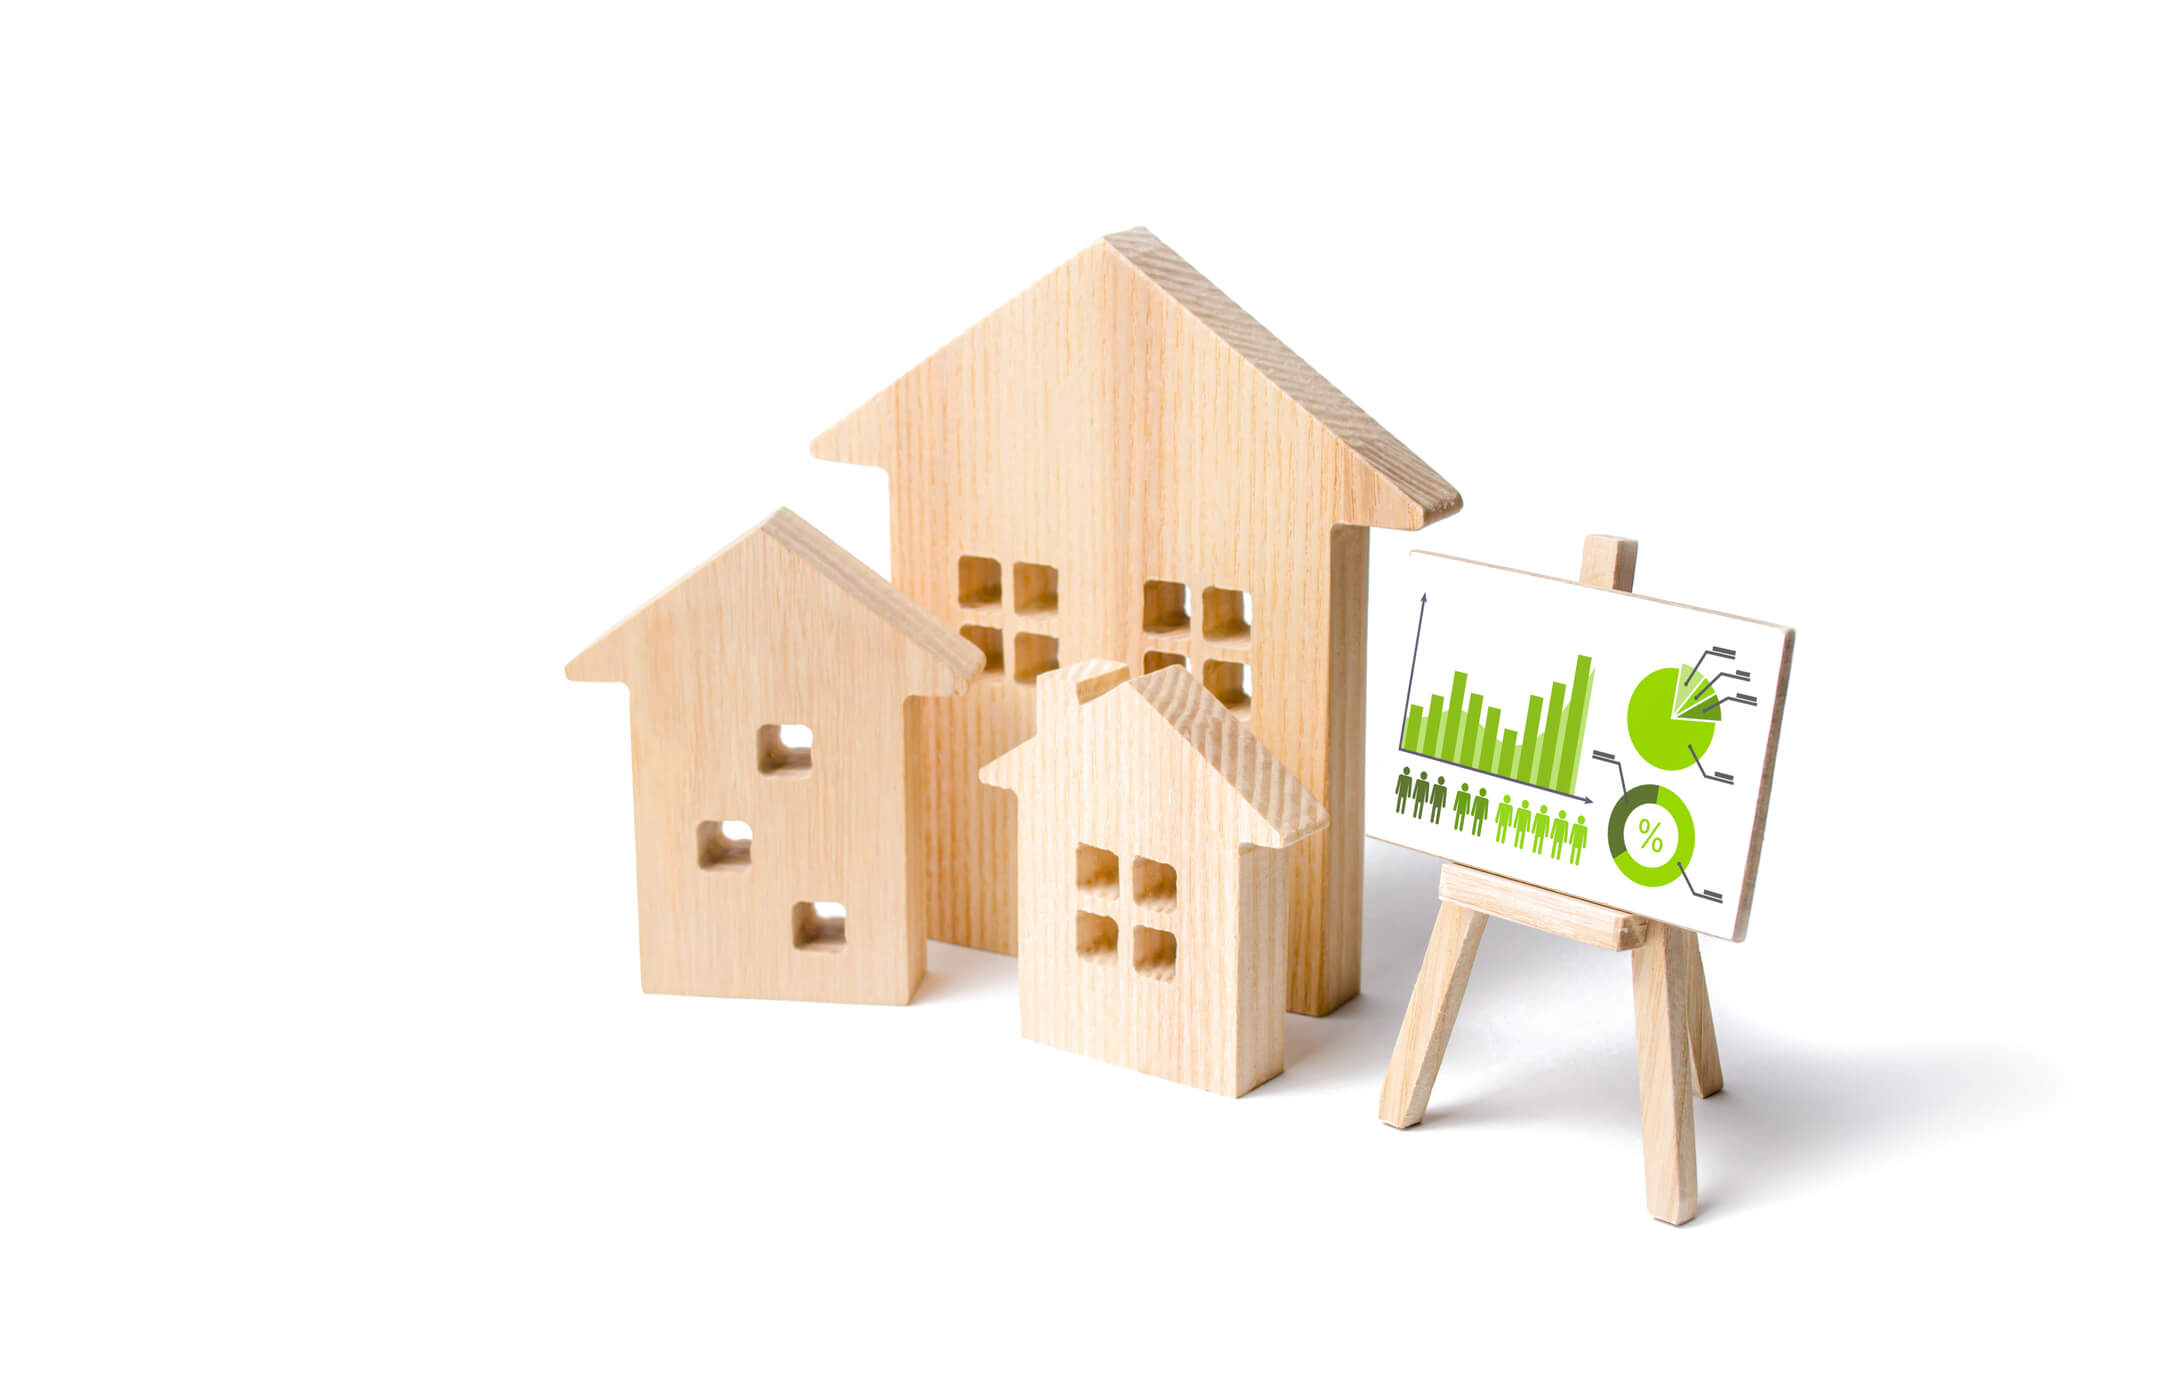 model houses and an easel with energy consumption statistics on